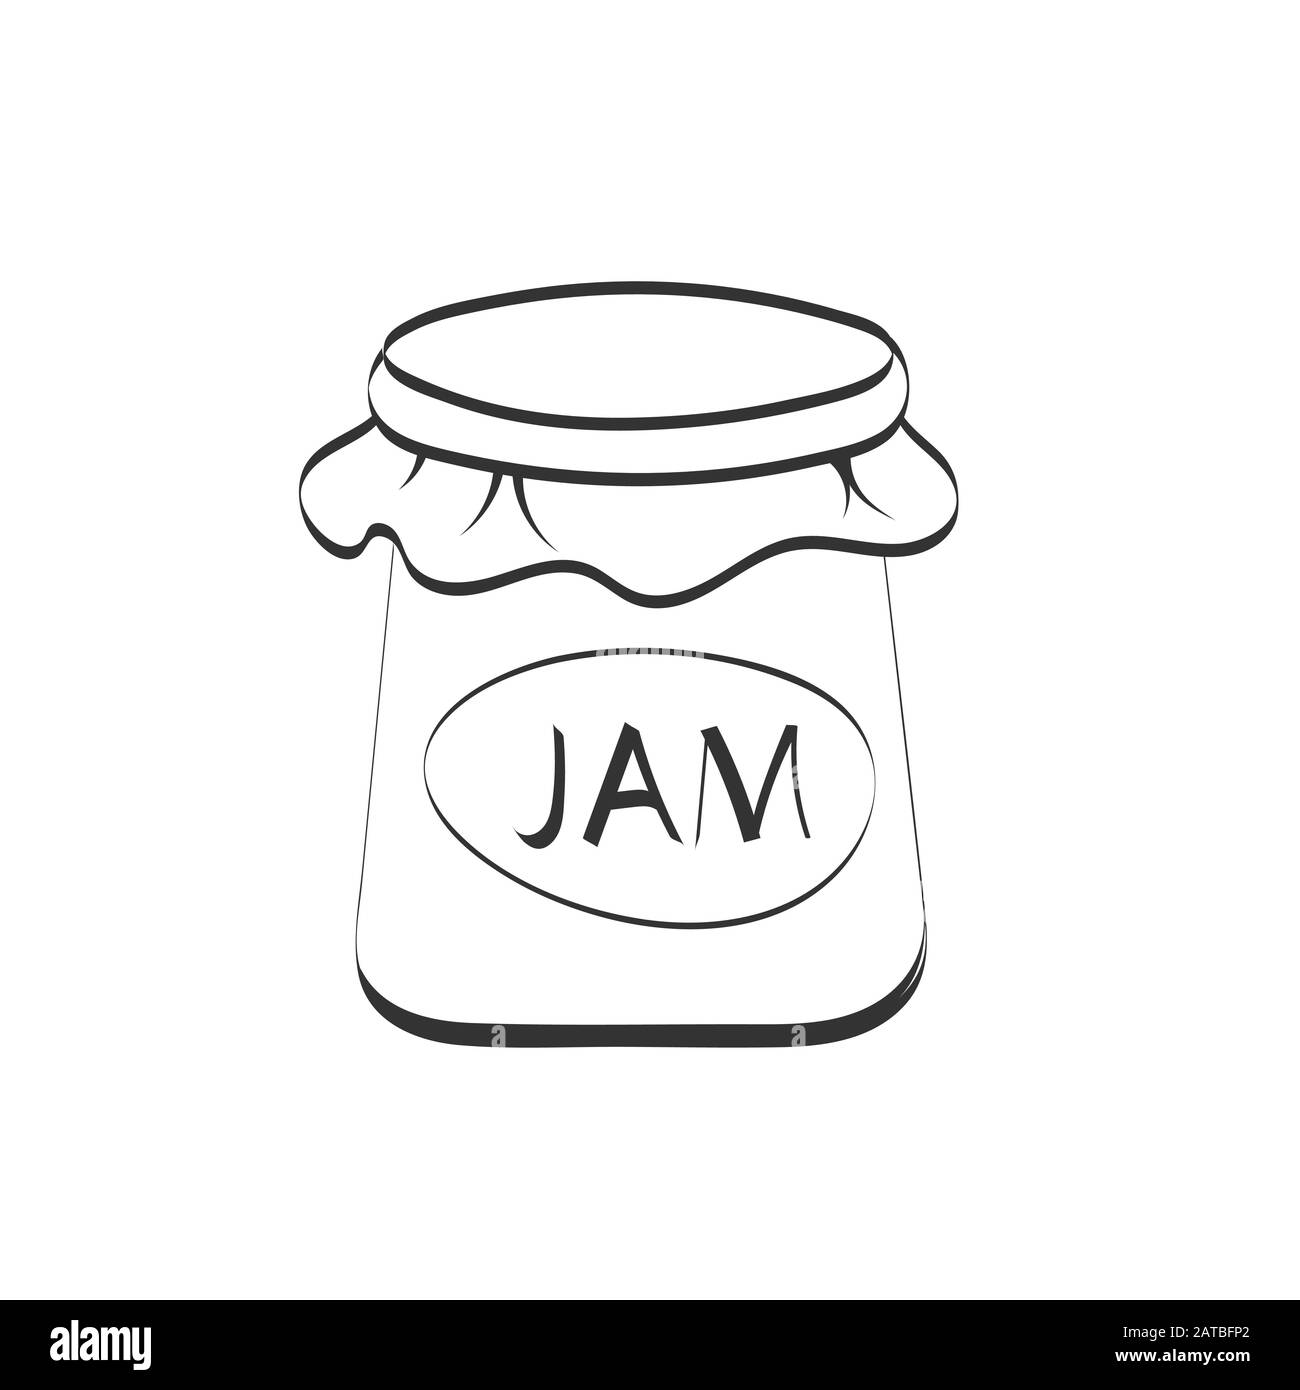 https://c8.alamy.com/comp/2ATBFP2/simple-outline-silhouette-in-the-style-of-doodle-with-a-jar-of-jam-and-an-inscription-for-coloring-books-isolated-on-a-white-background-2ATBFP2.jpg